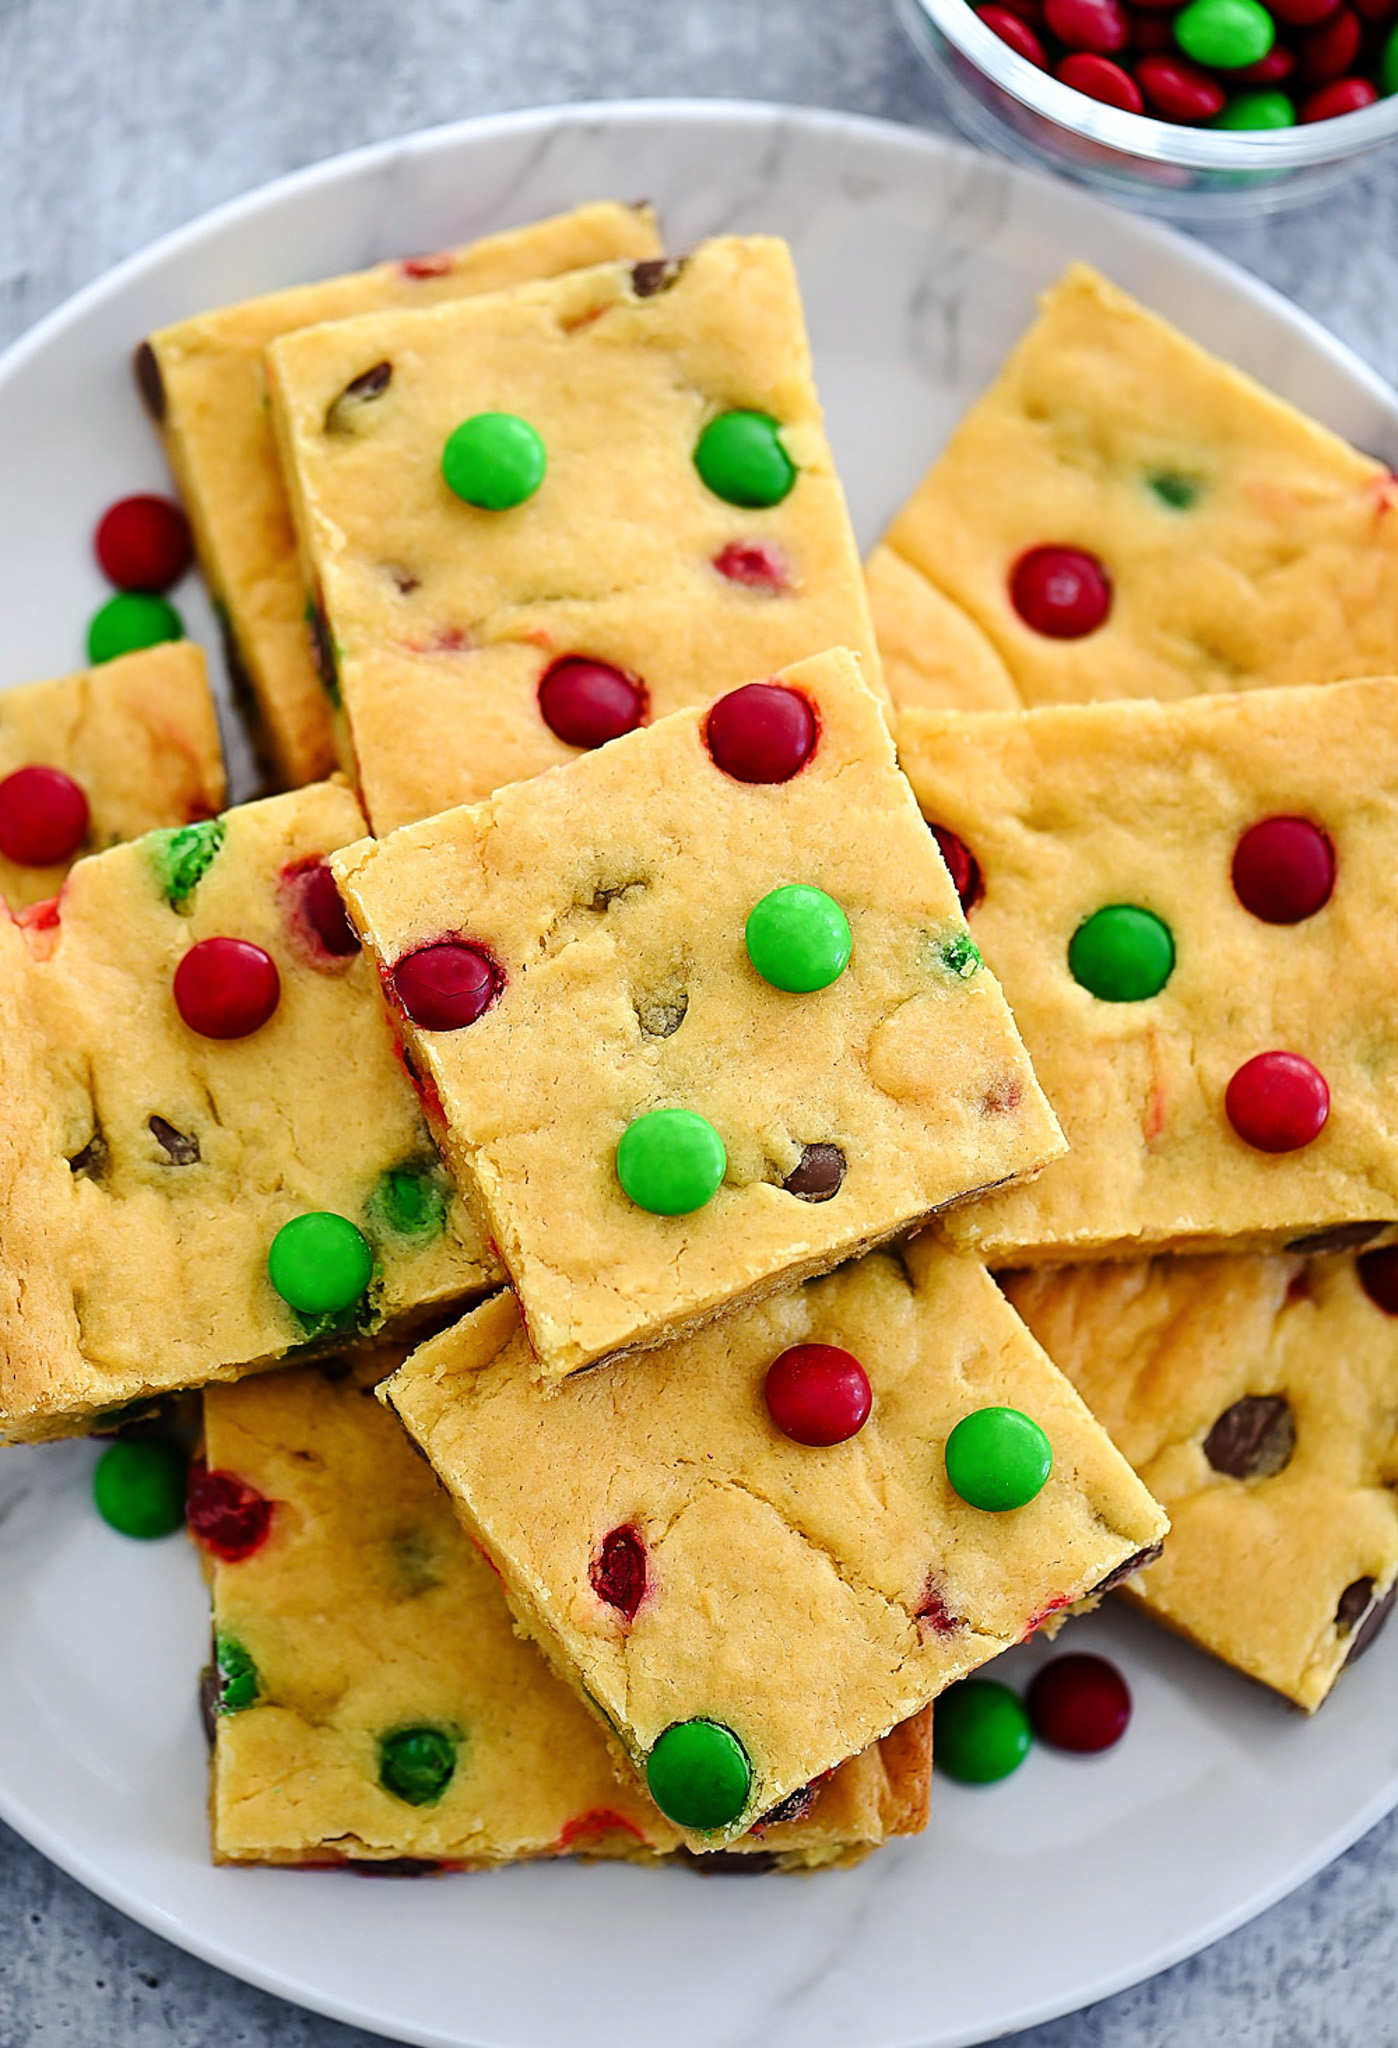 Cake Mix Cookie Bars are soft, chewy and loaded with chocolate chips and M&M's. Life-in-the-Lofthouse.com